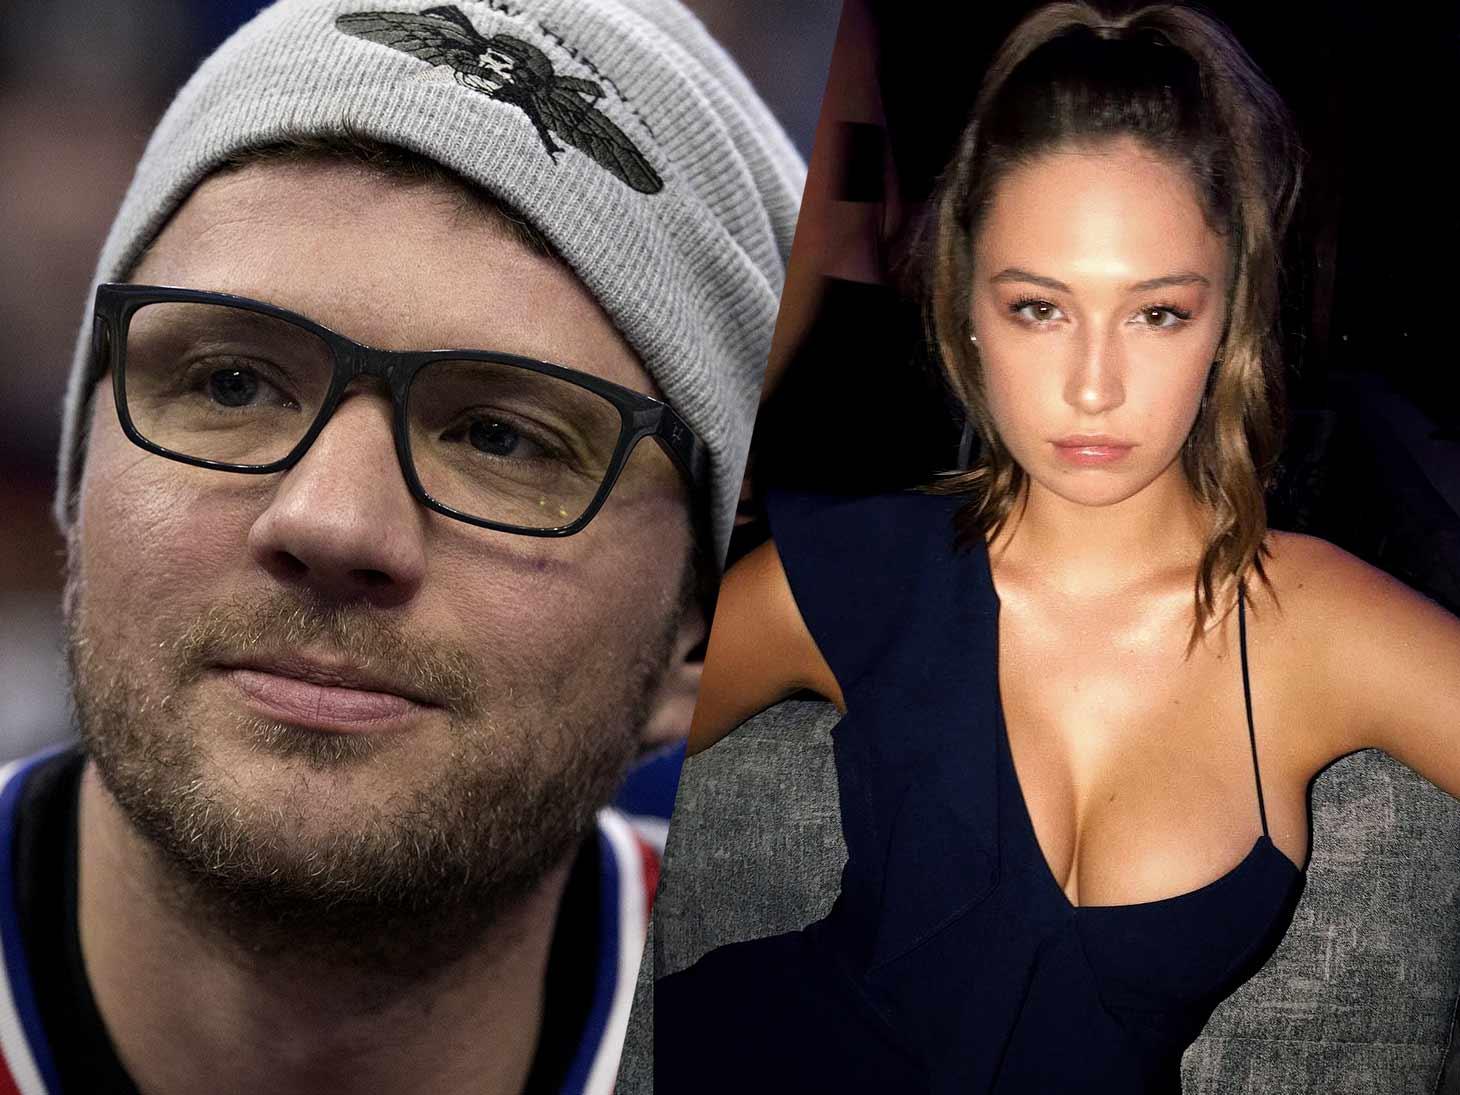 Ryan Phillippe Explains Alleged Domestic Violence Incident With Ex: ‘I Attempted to Pick Her Up Like a Baby’